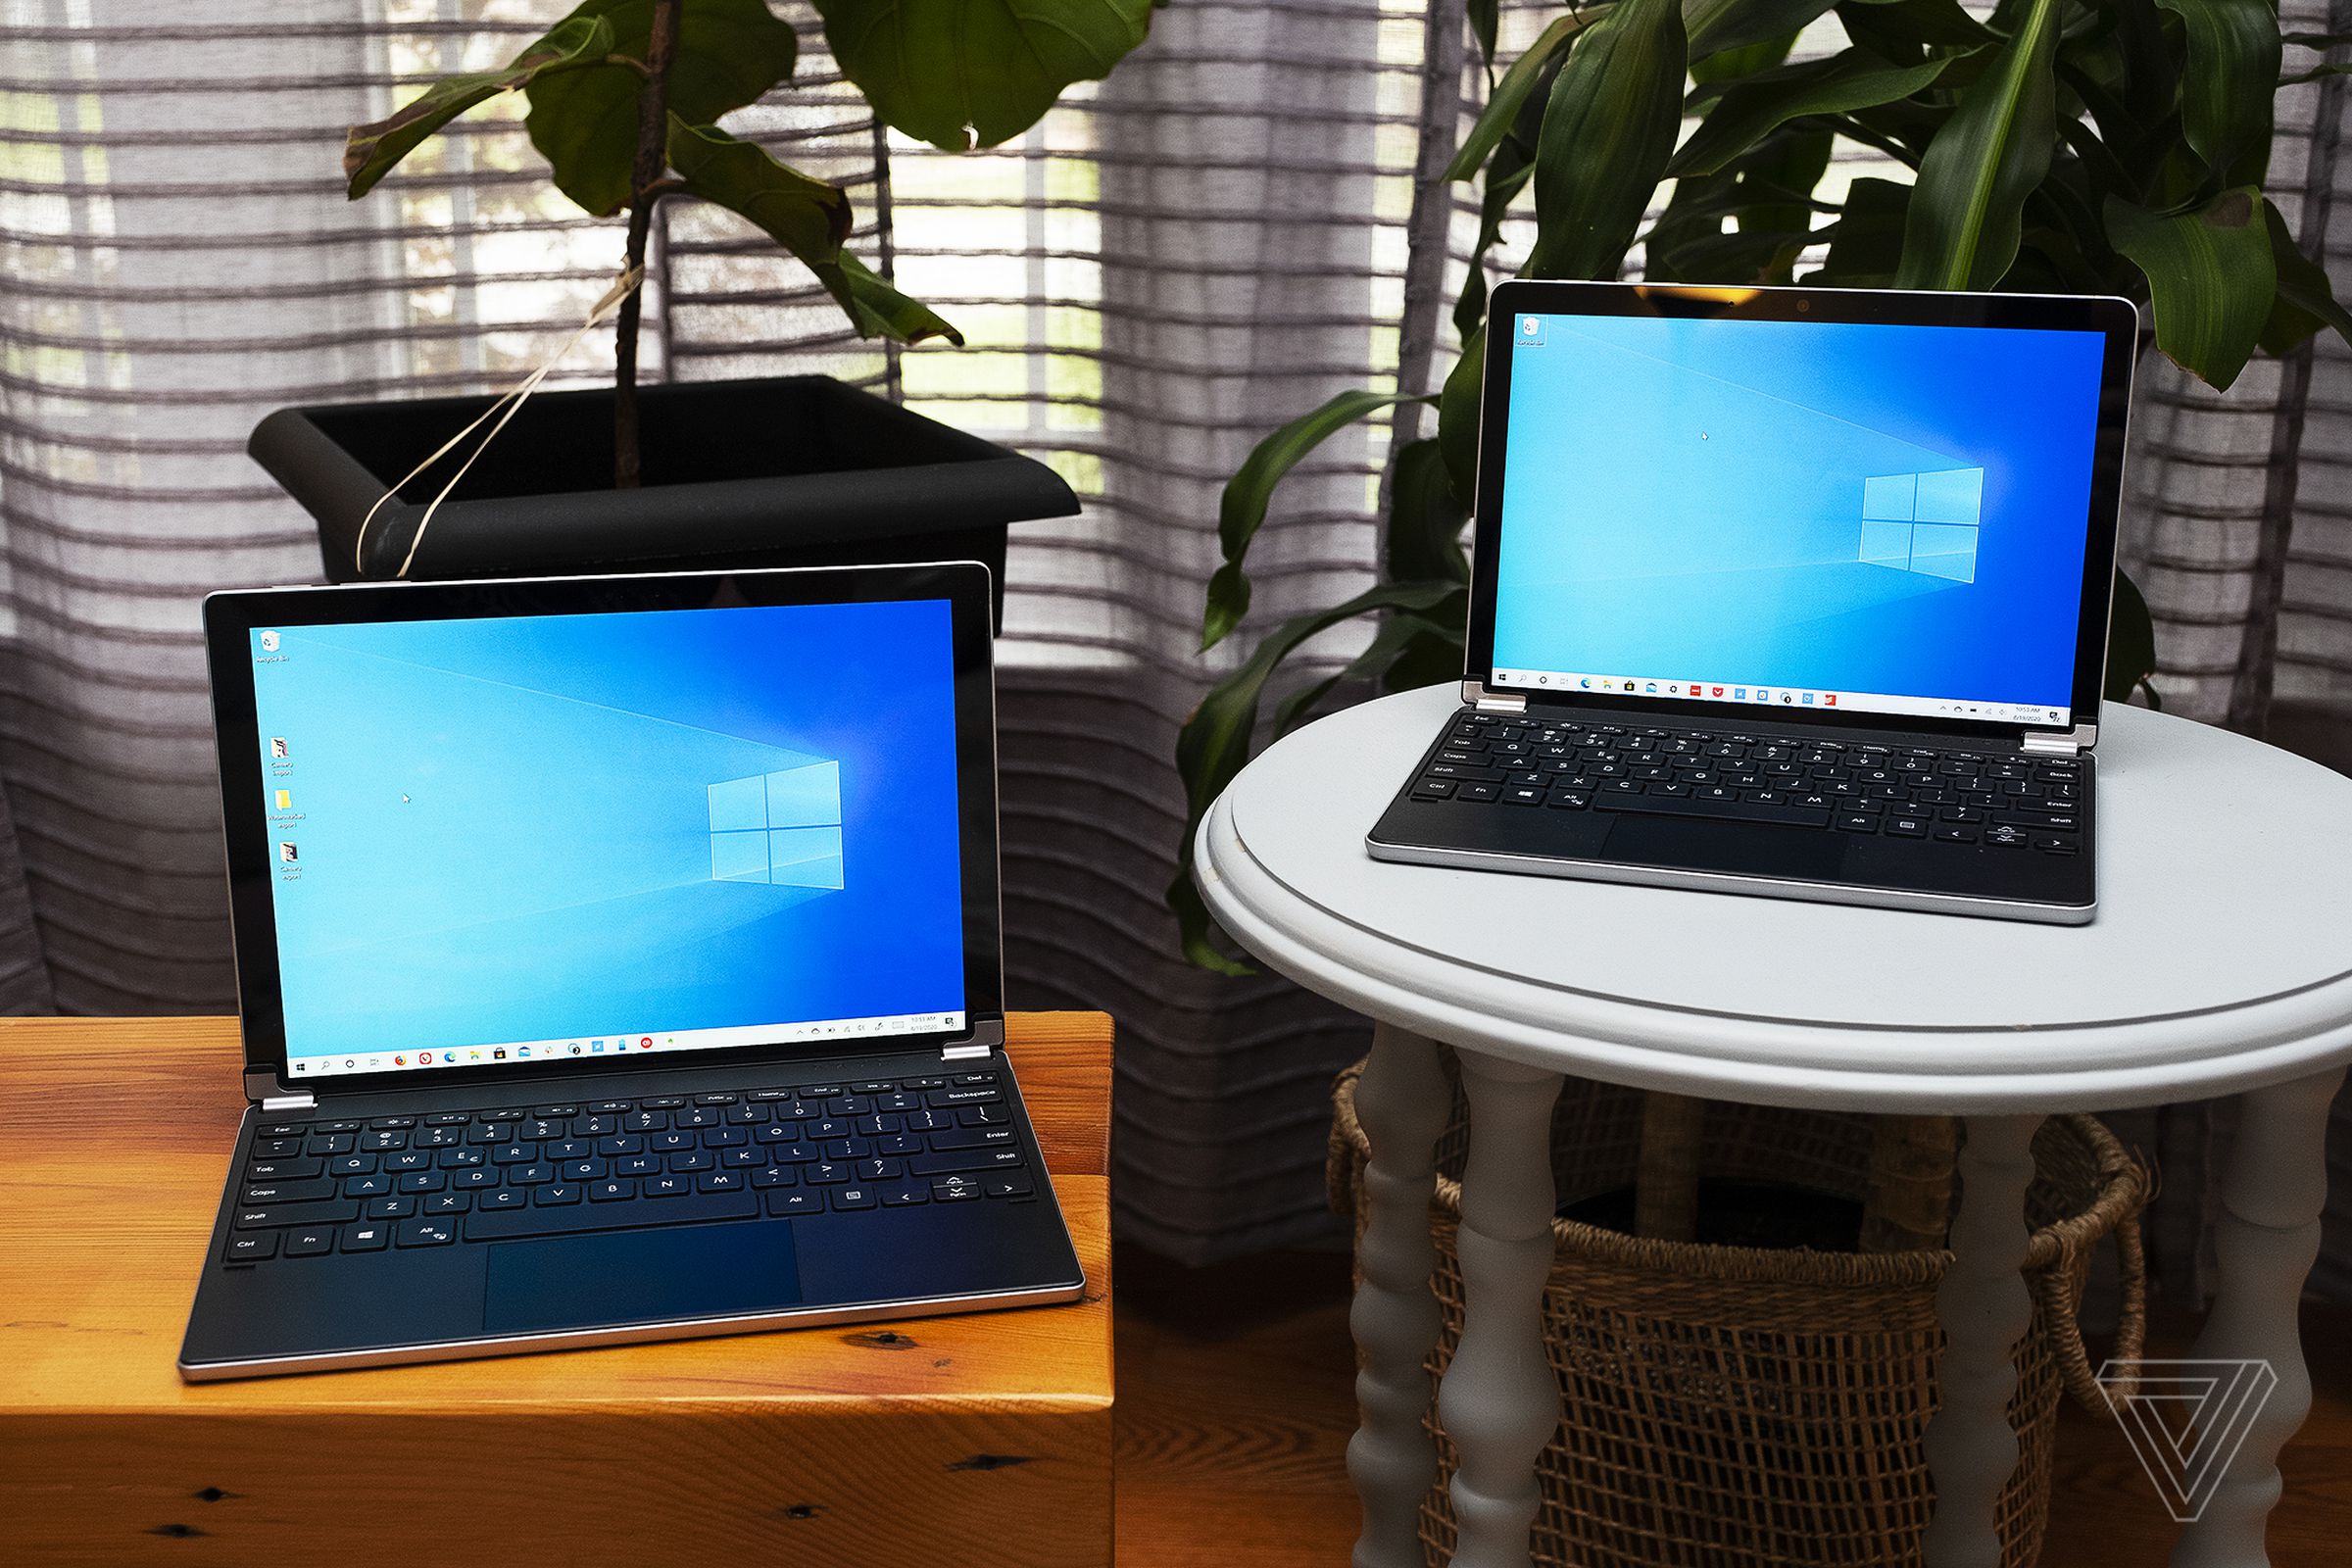 The Brydge Pro Plus 12.3-inch (left) and the Brydge Go Plus 